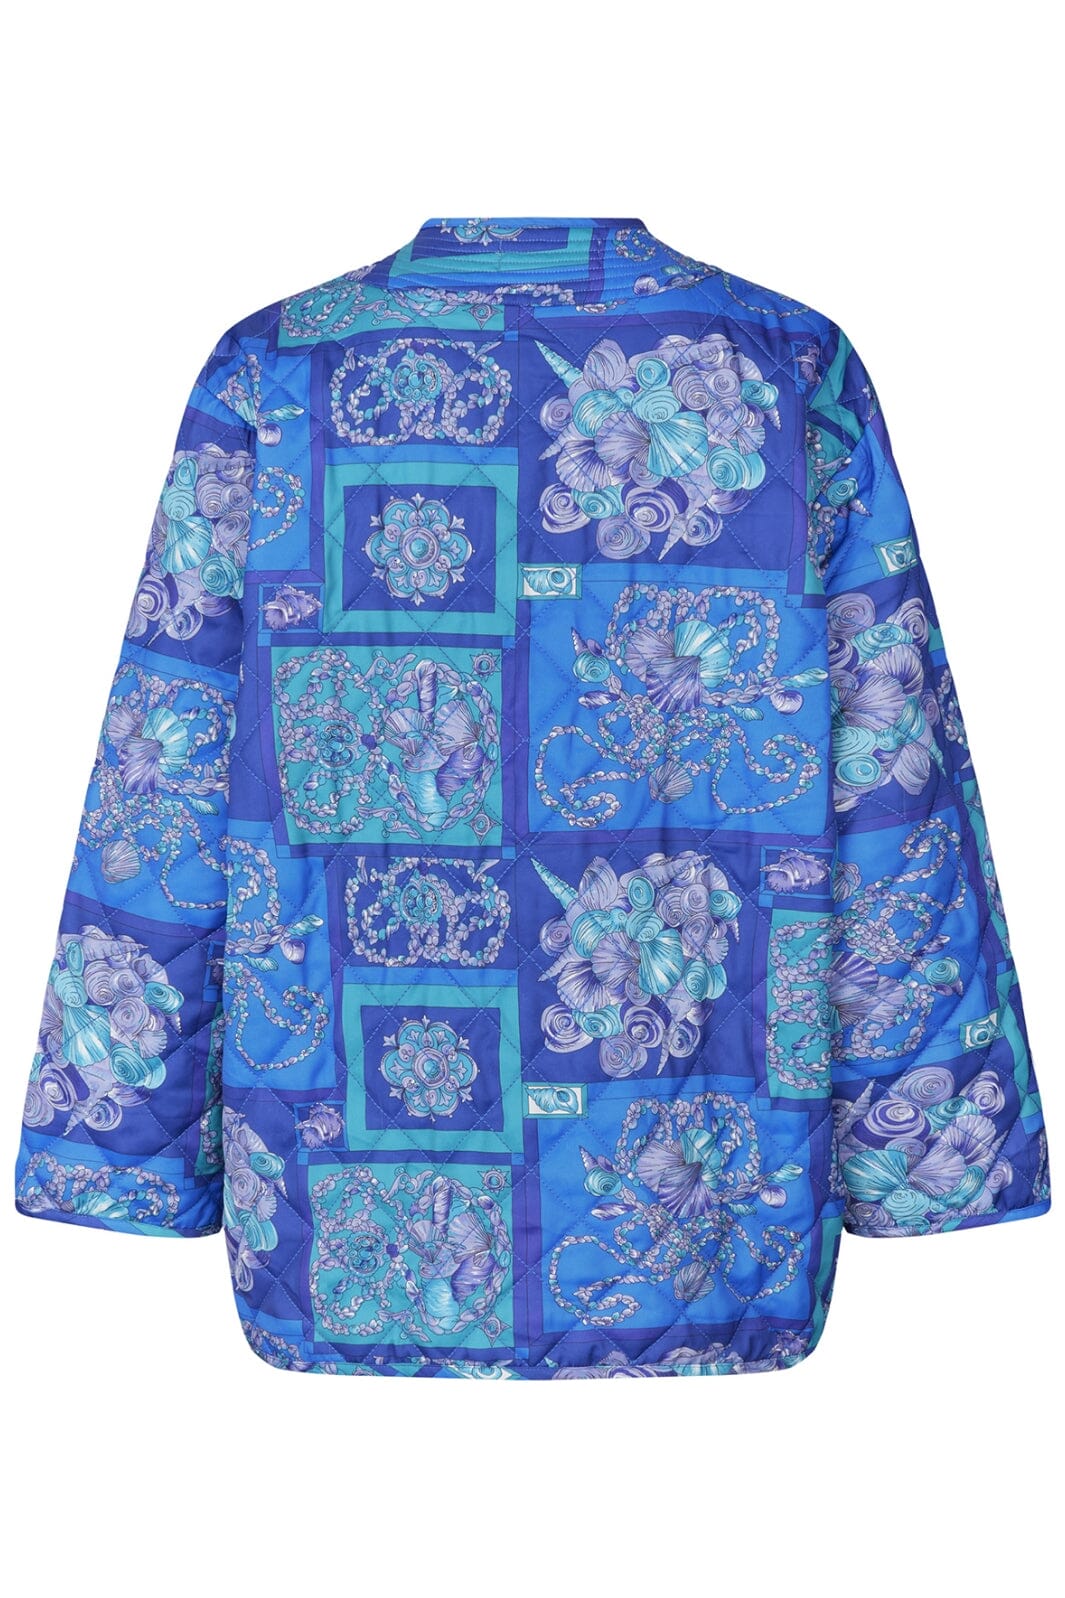 Lollys Laundry - LilyLL Quilted Jacket LS - 20 Blue Jakker 